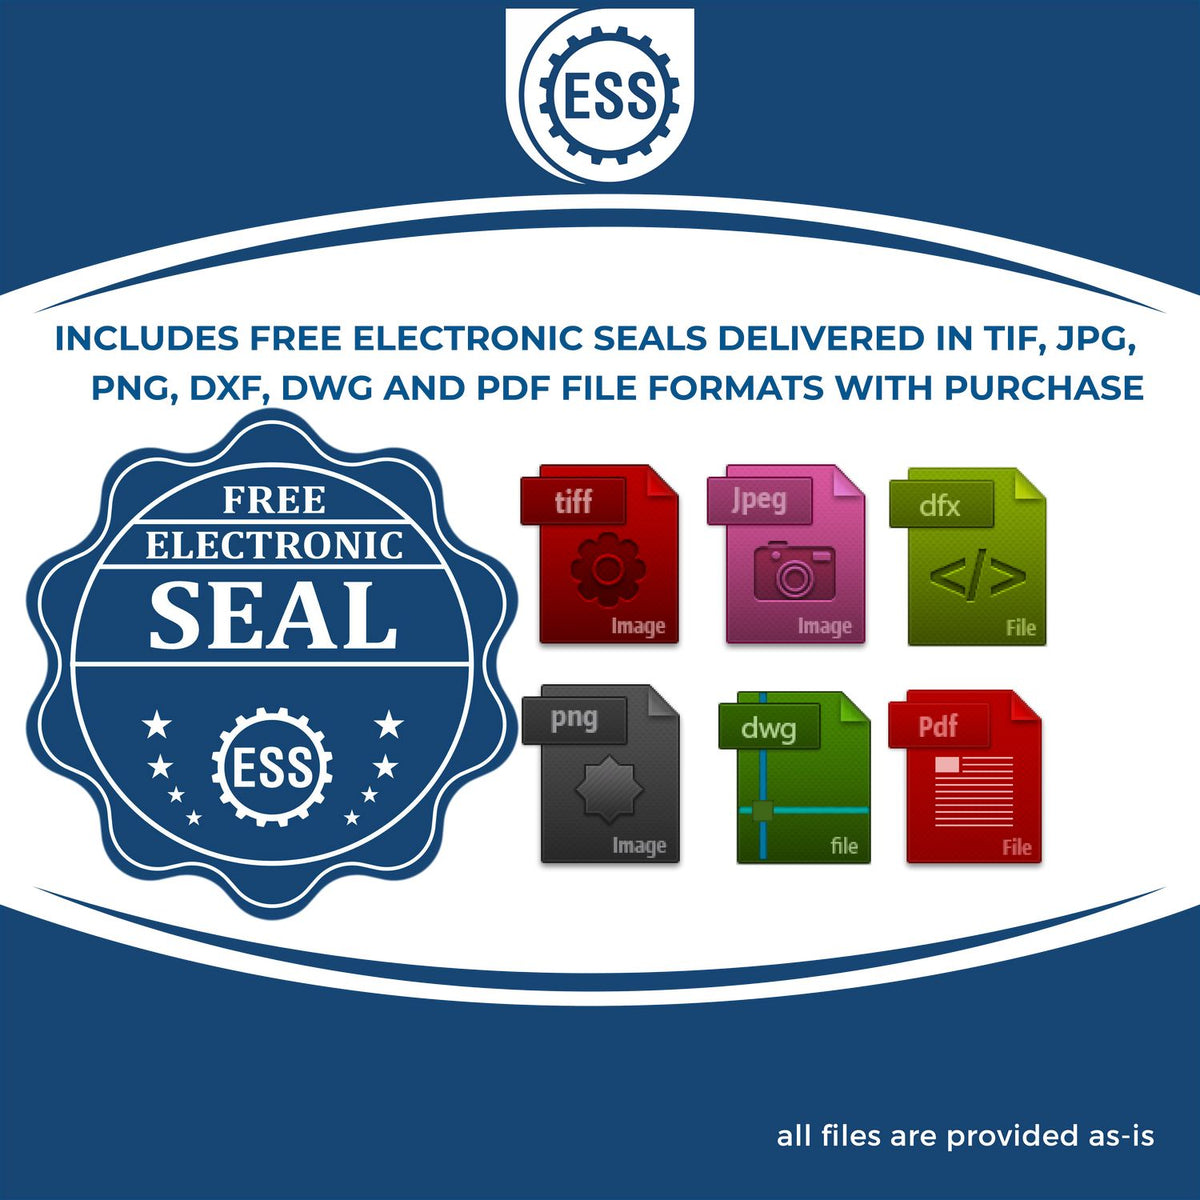 An infographic for the free electronic seal for the Premium MaxLight Pre-Inked North Carolina Geology Stamp illustrating the different file type icons such as DXF, DWG, TIF, JPG and PNG.